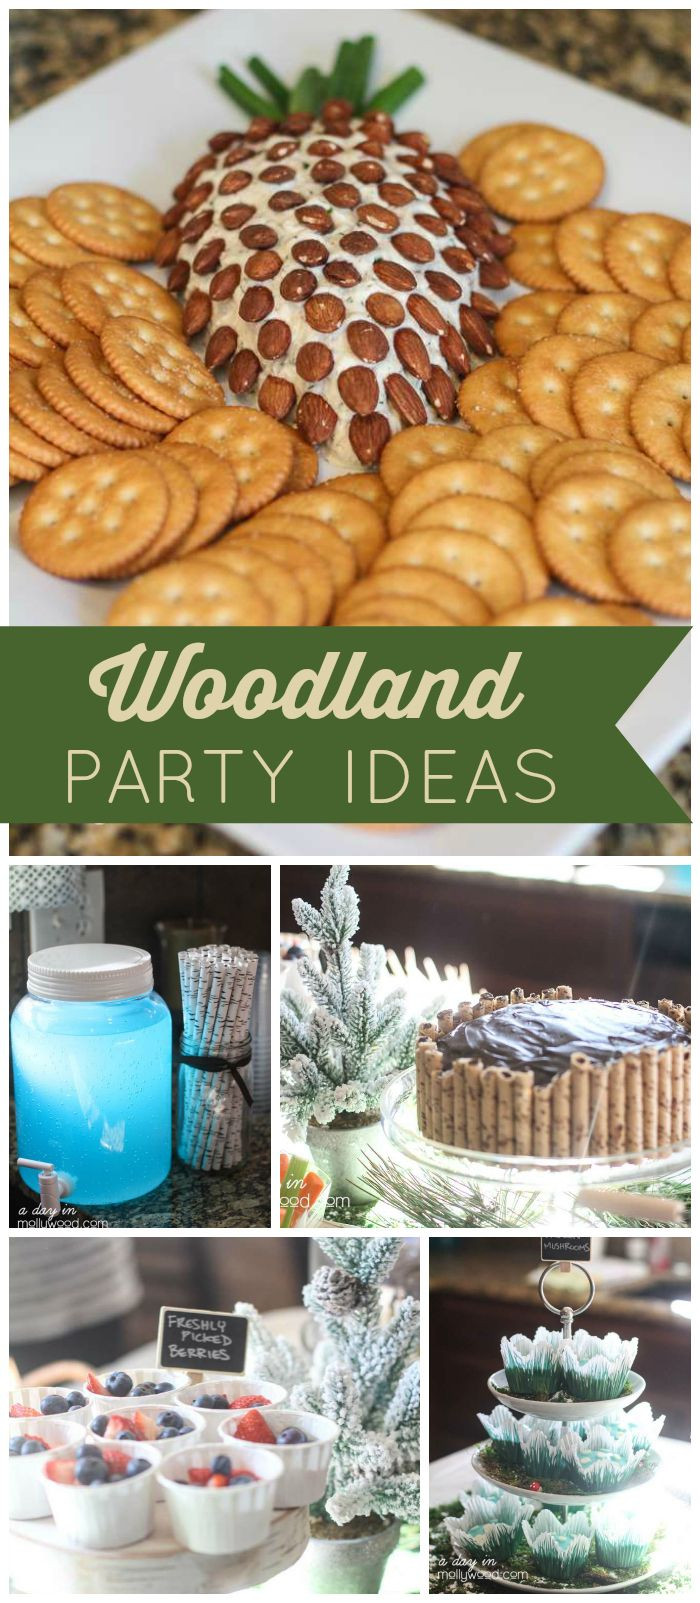 Woodland Birthday Party Food Ideas
 What a lovely winter woodland first birthday party Fun